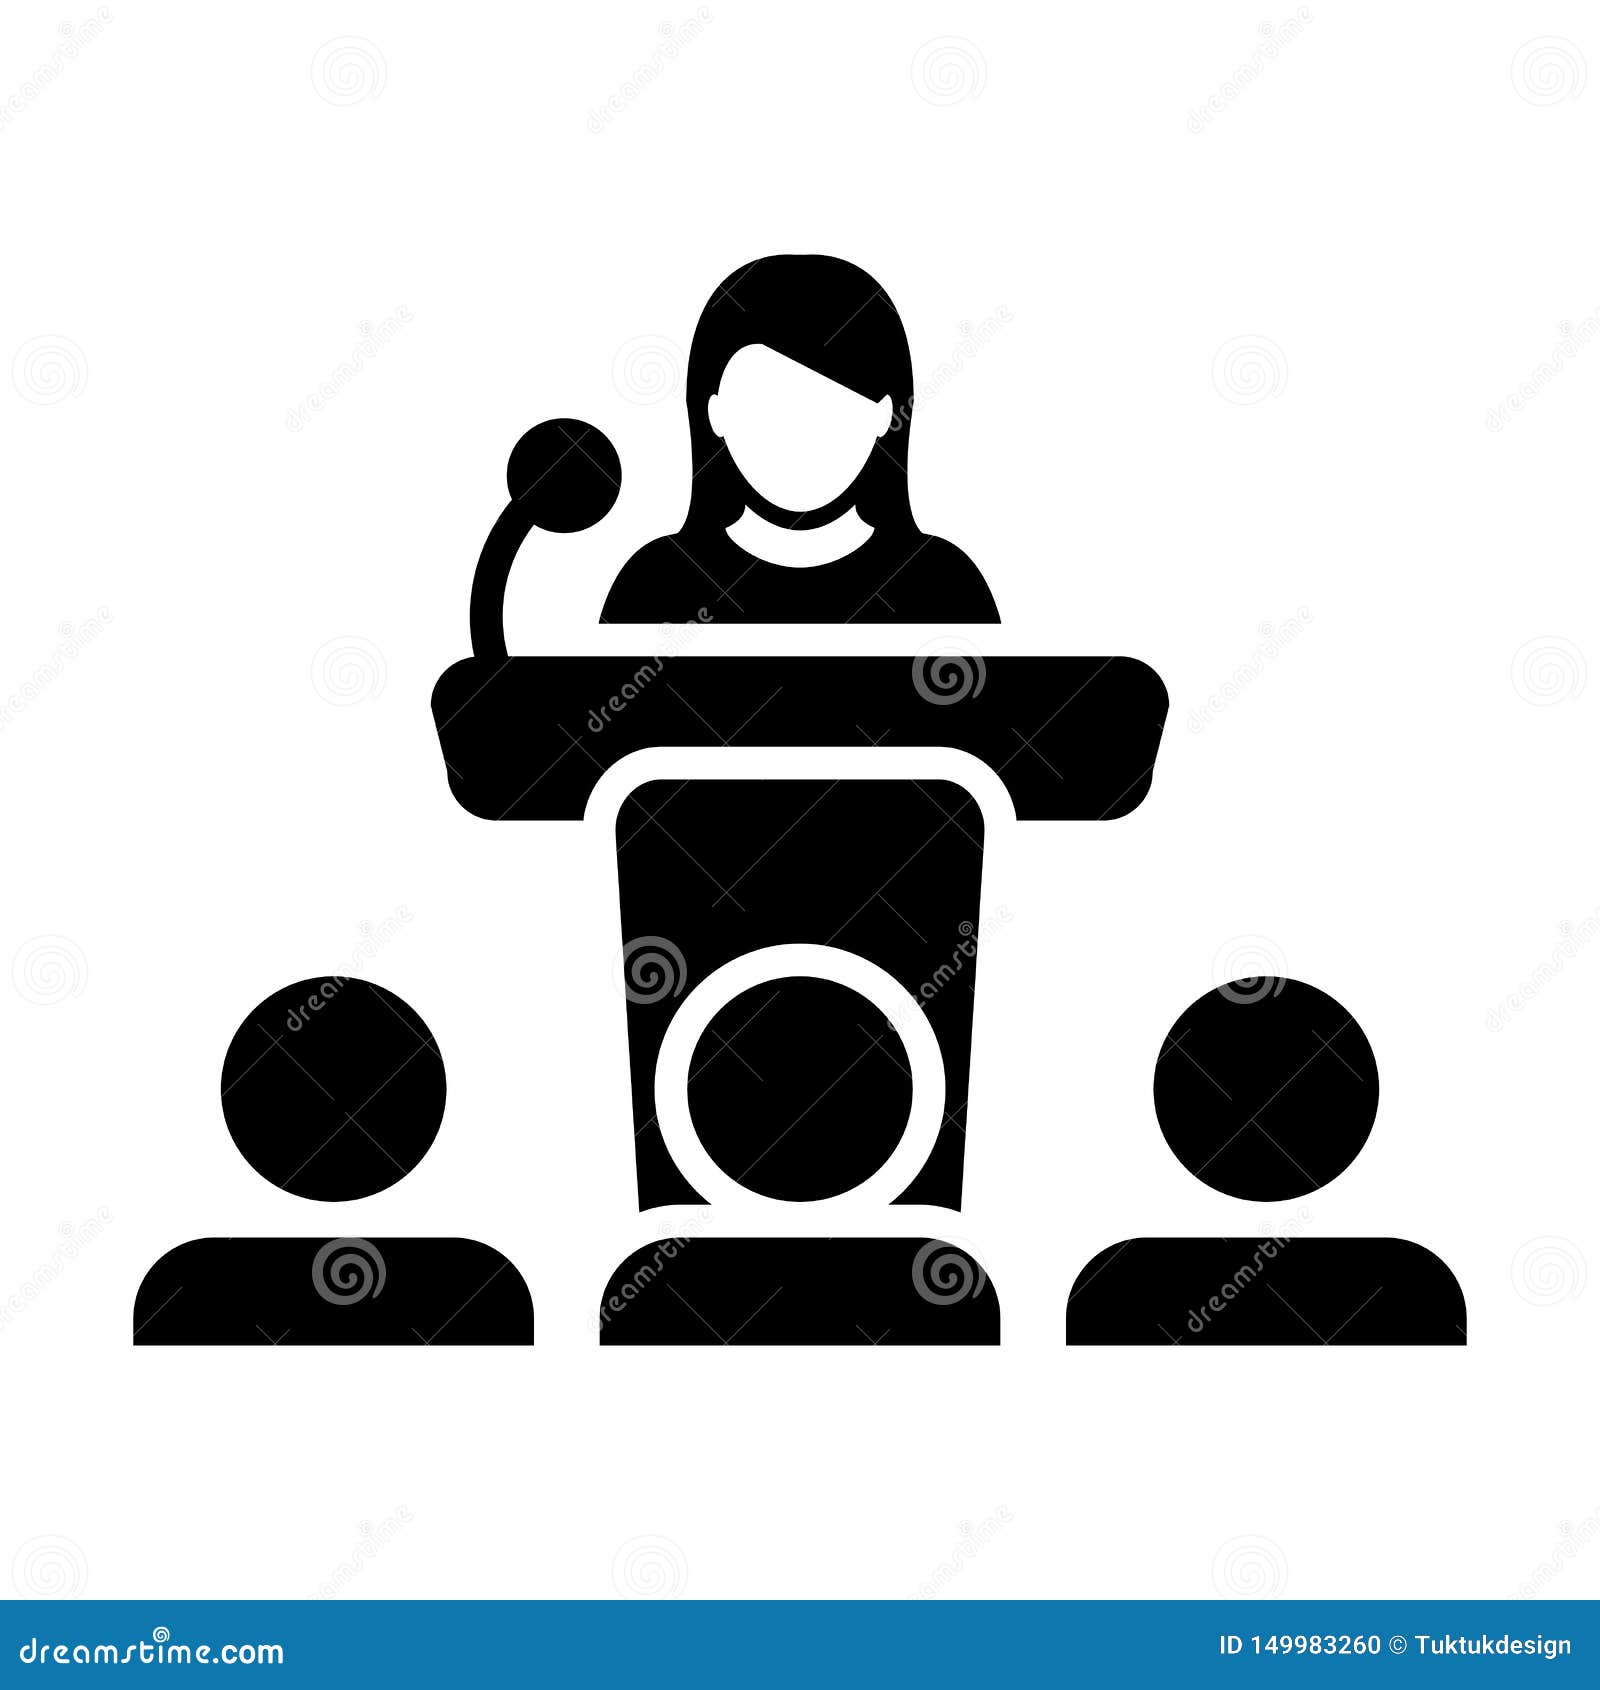 Speaker Icon Vector Female Person On Podium Symbol For Public Speech With Microphone In Glyph Pictogram Stock Vector Illustration Of Business Design